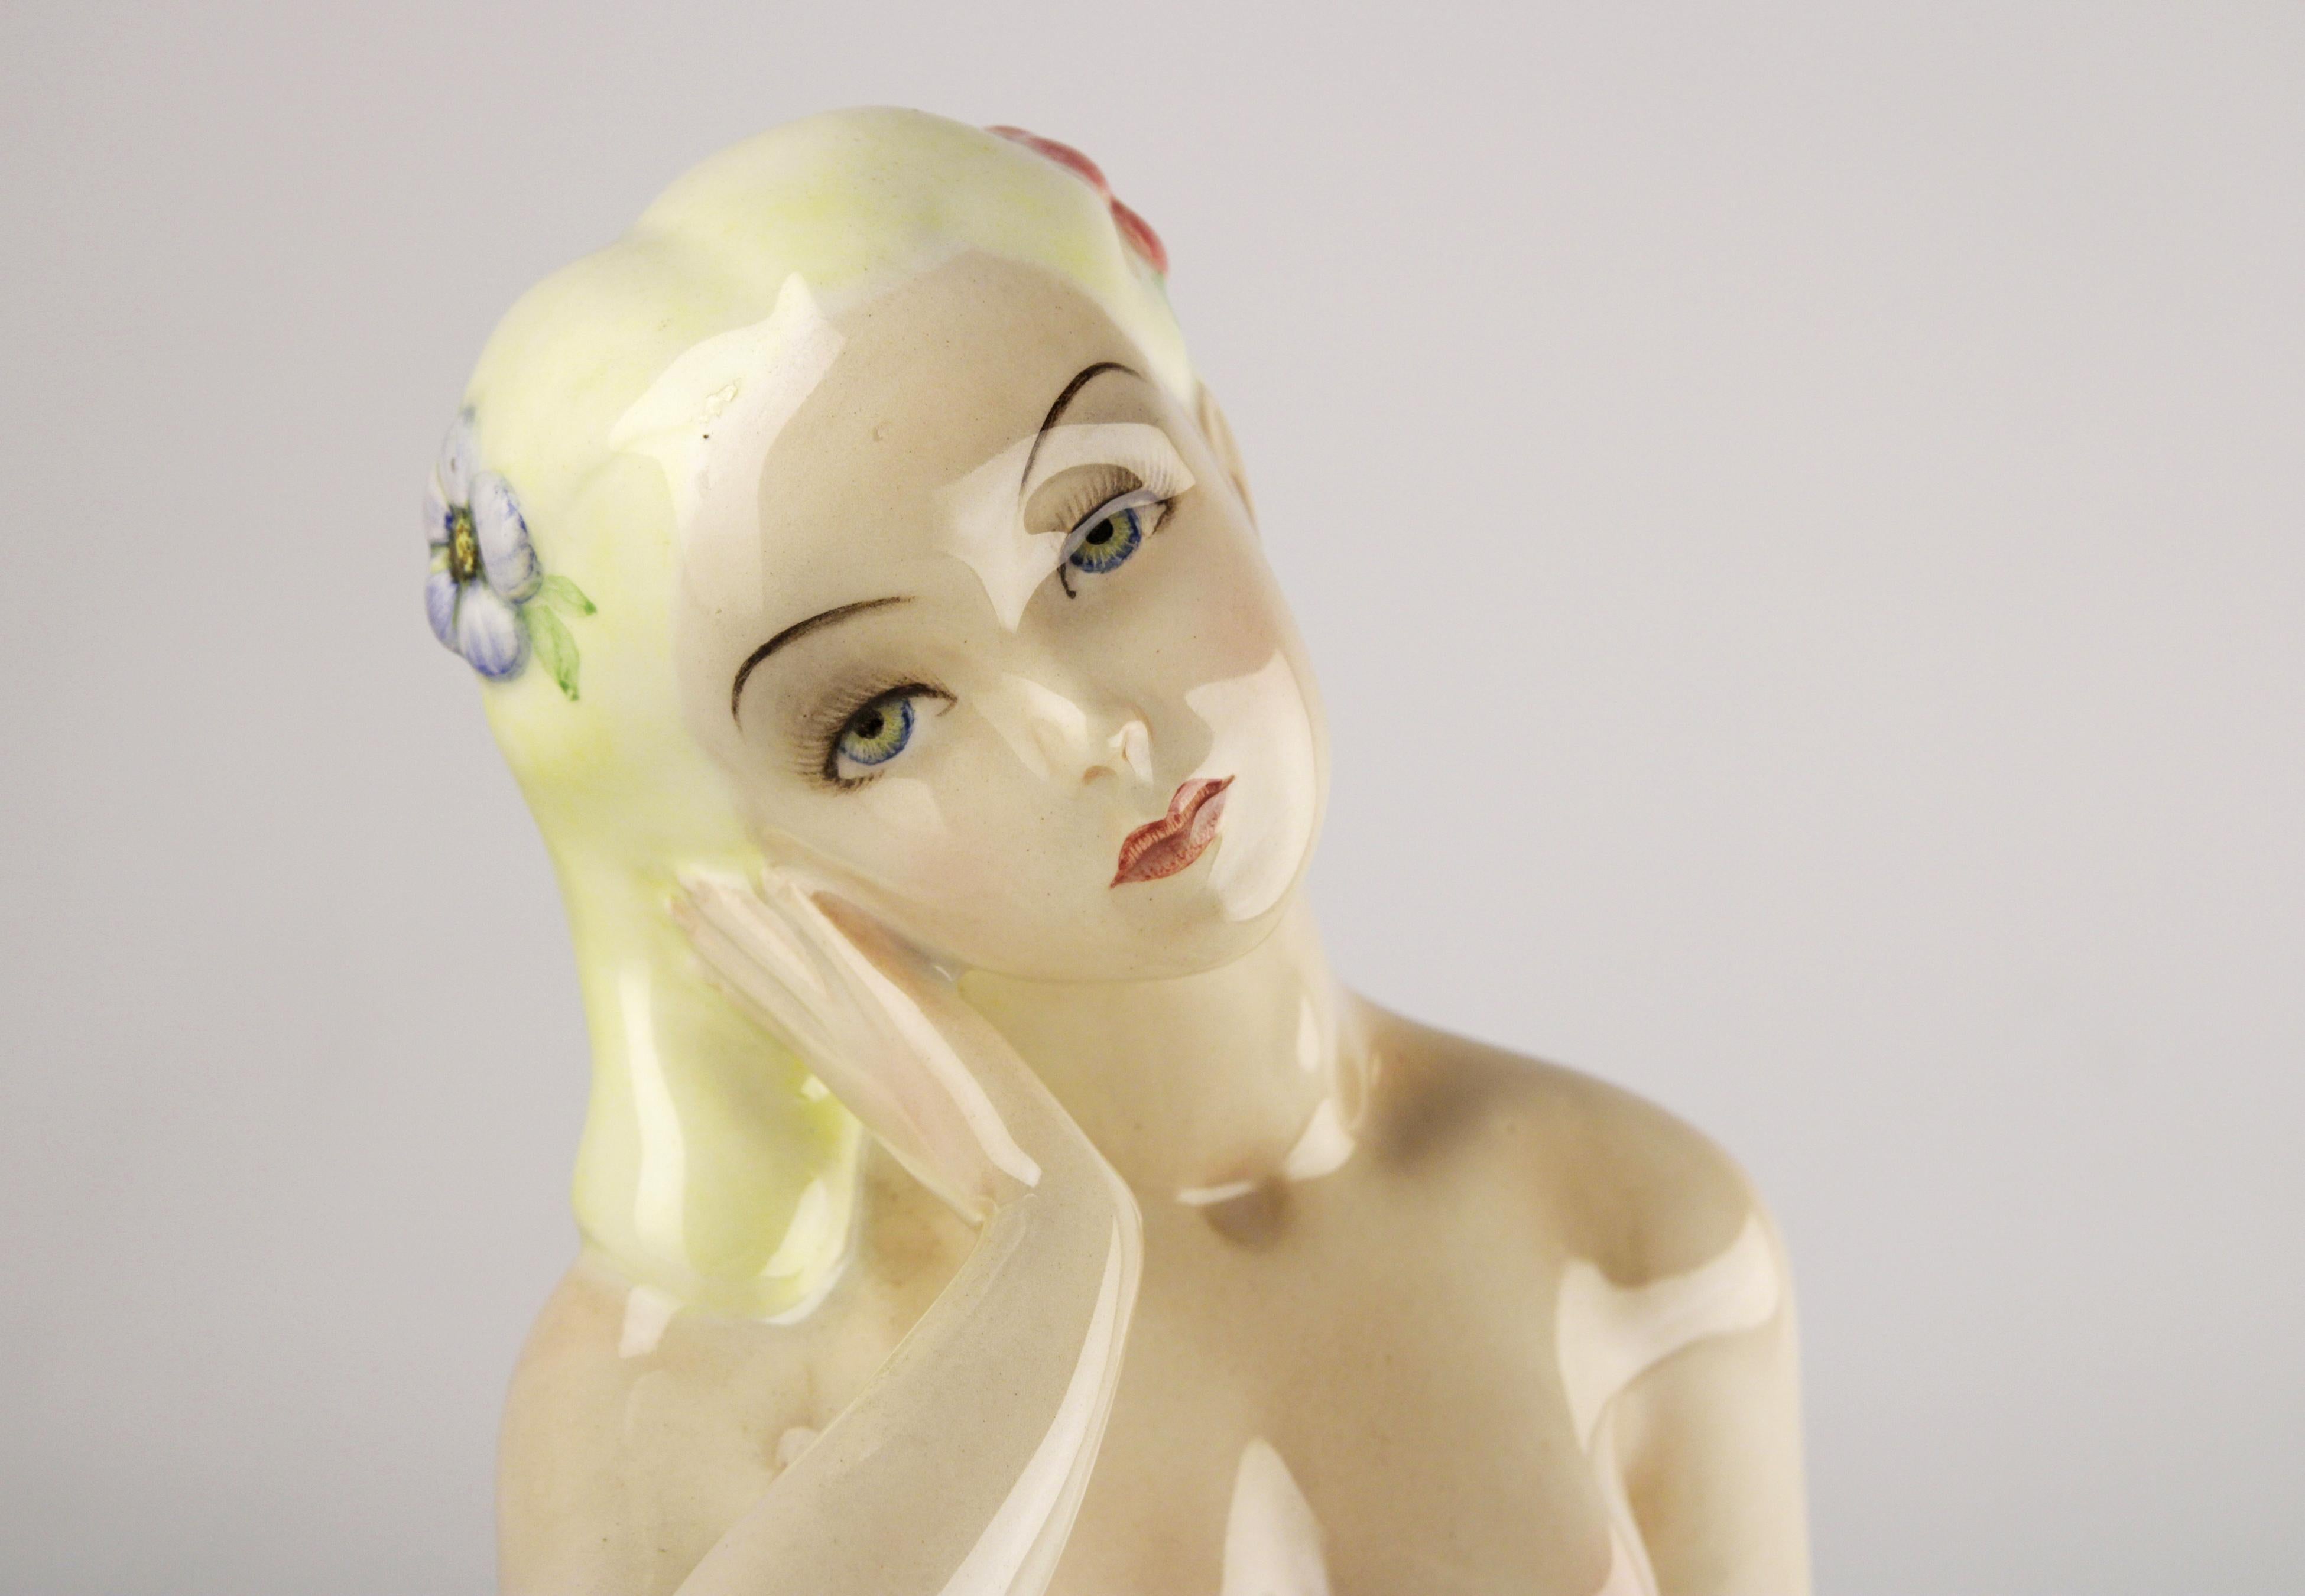 Mid-20th Century Glazed Ceramic Naked Woman Figure Sculpture from Torino, Italy In Good Condition For Sale In North Miami, FL